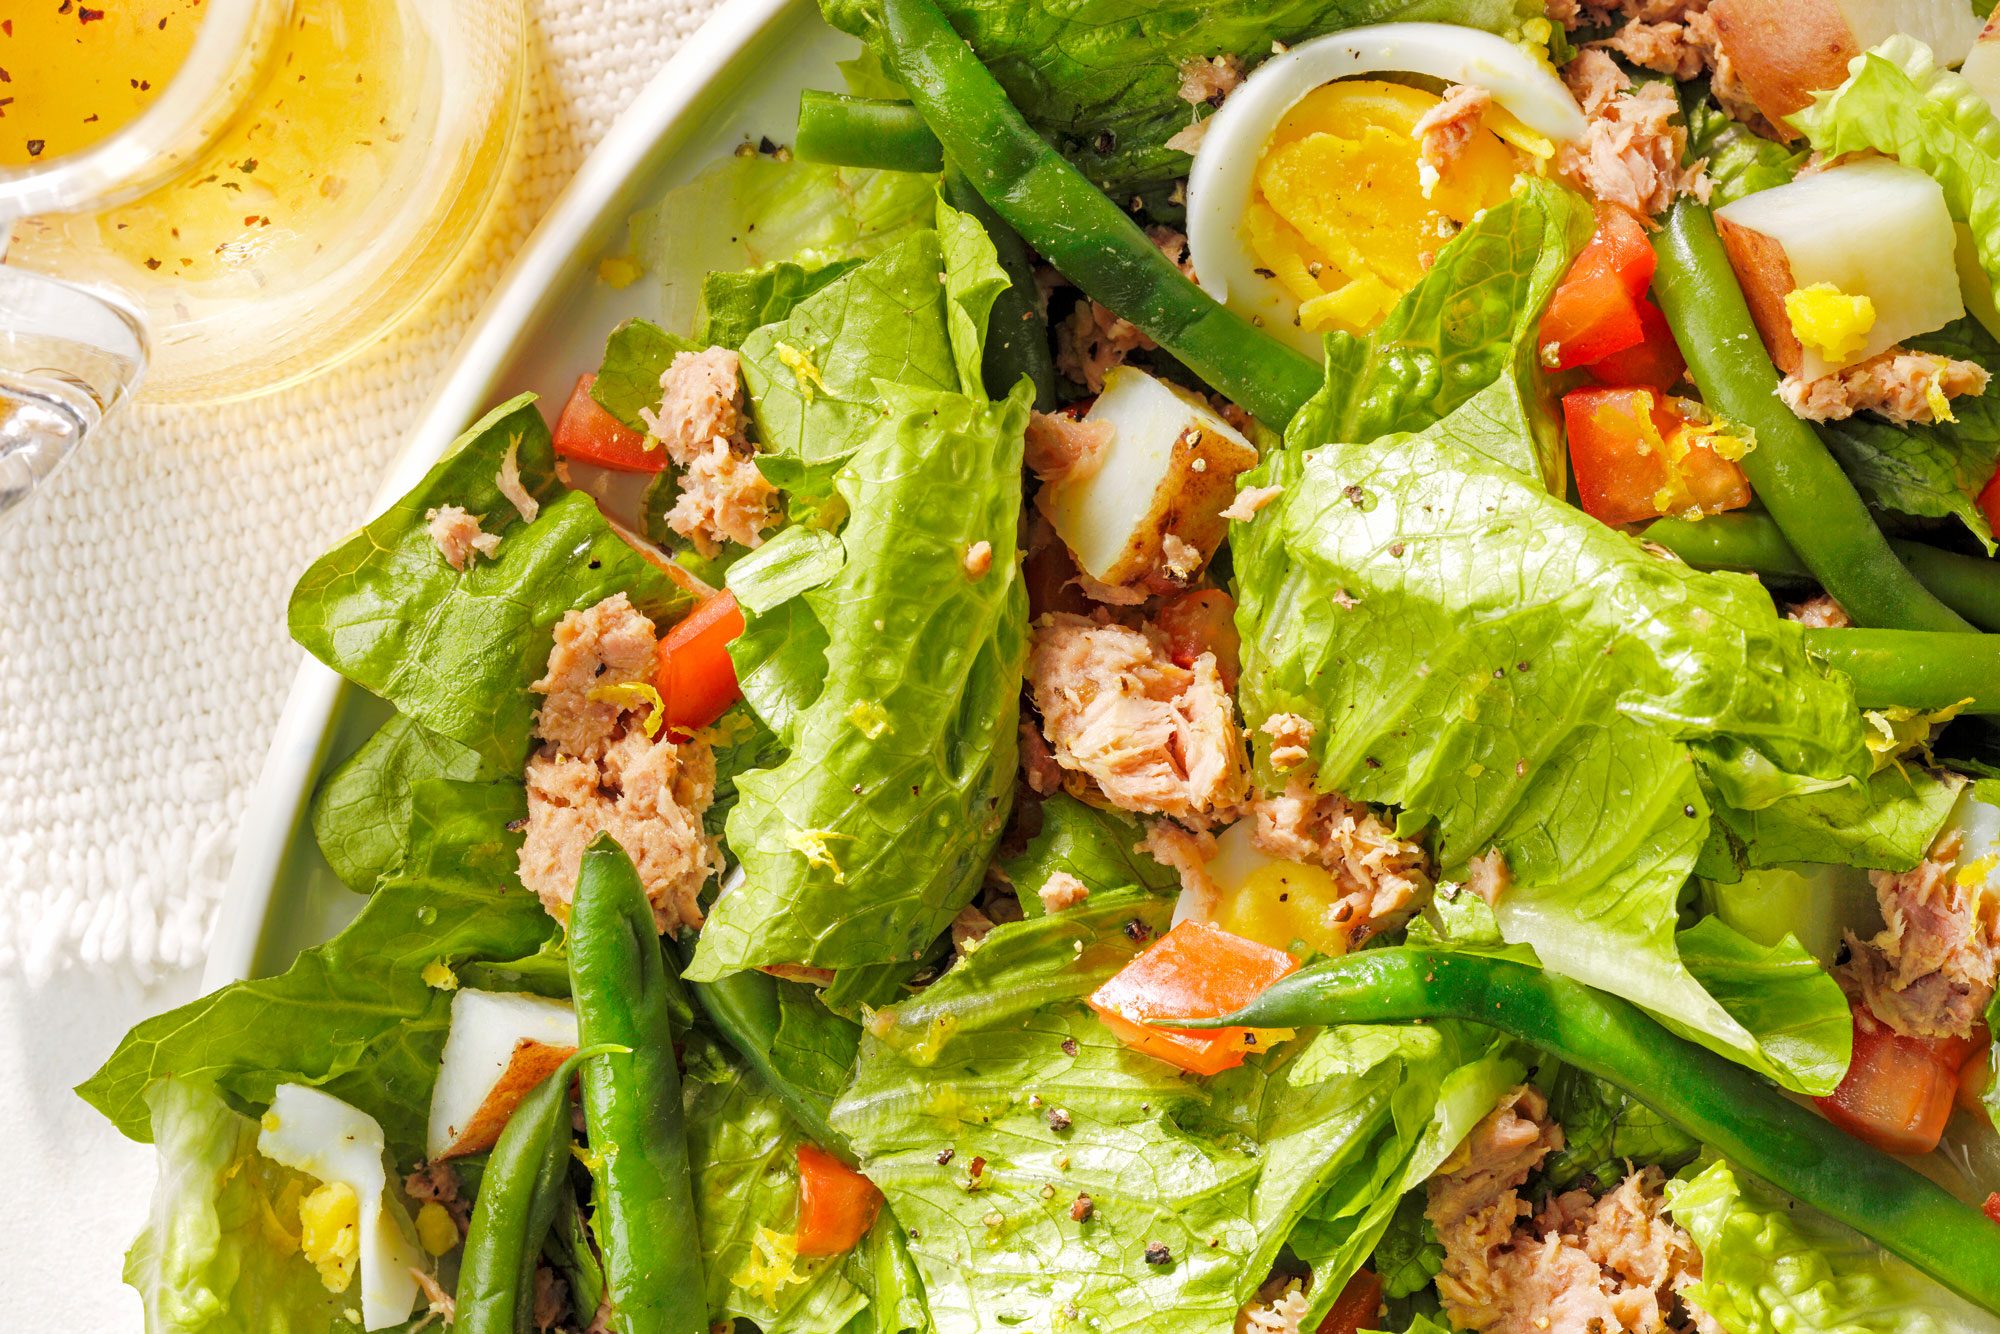 Plate of Tuna Nicoise salad with meat, veggies, and eggs